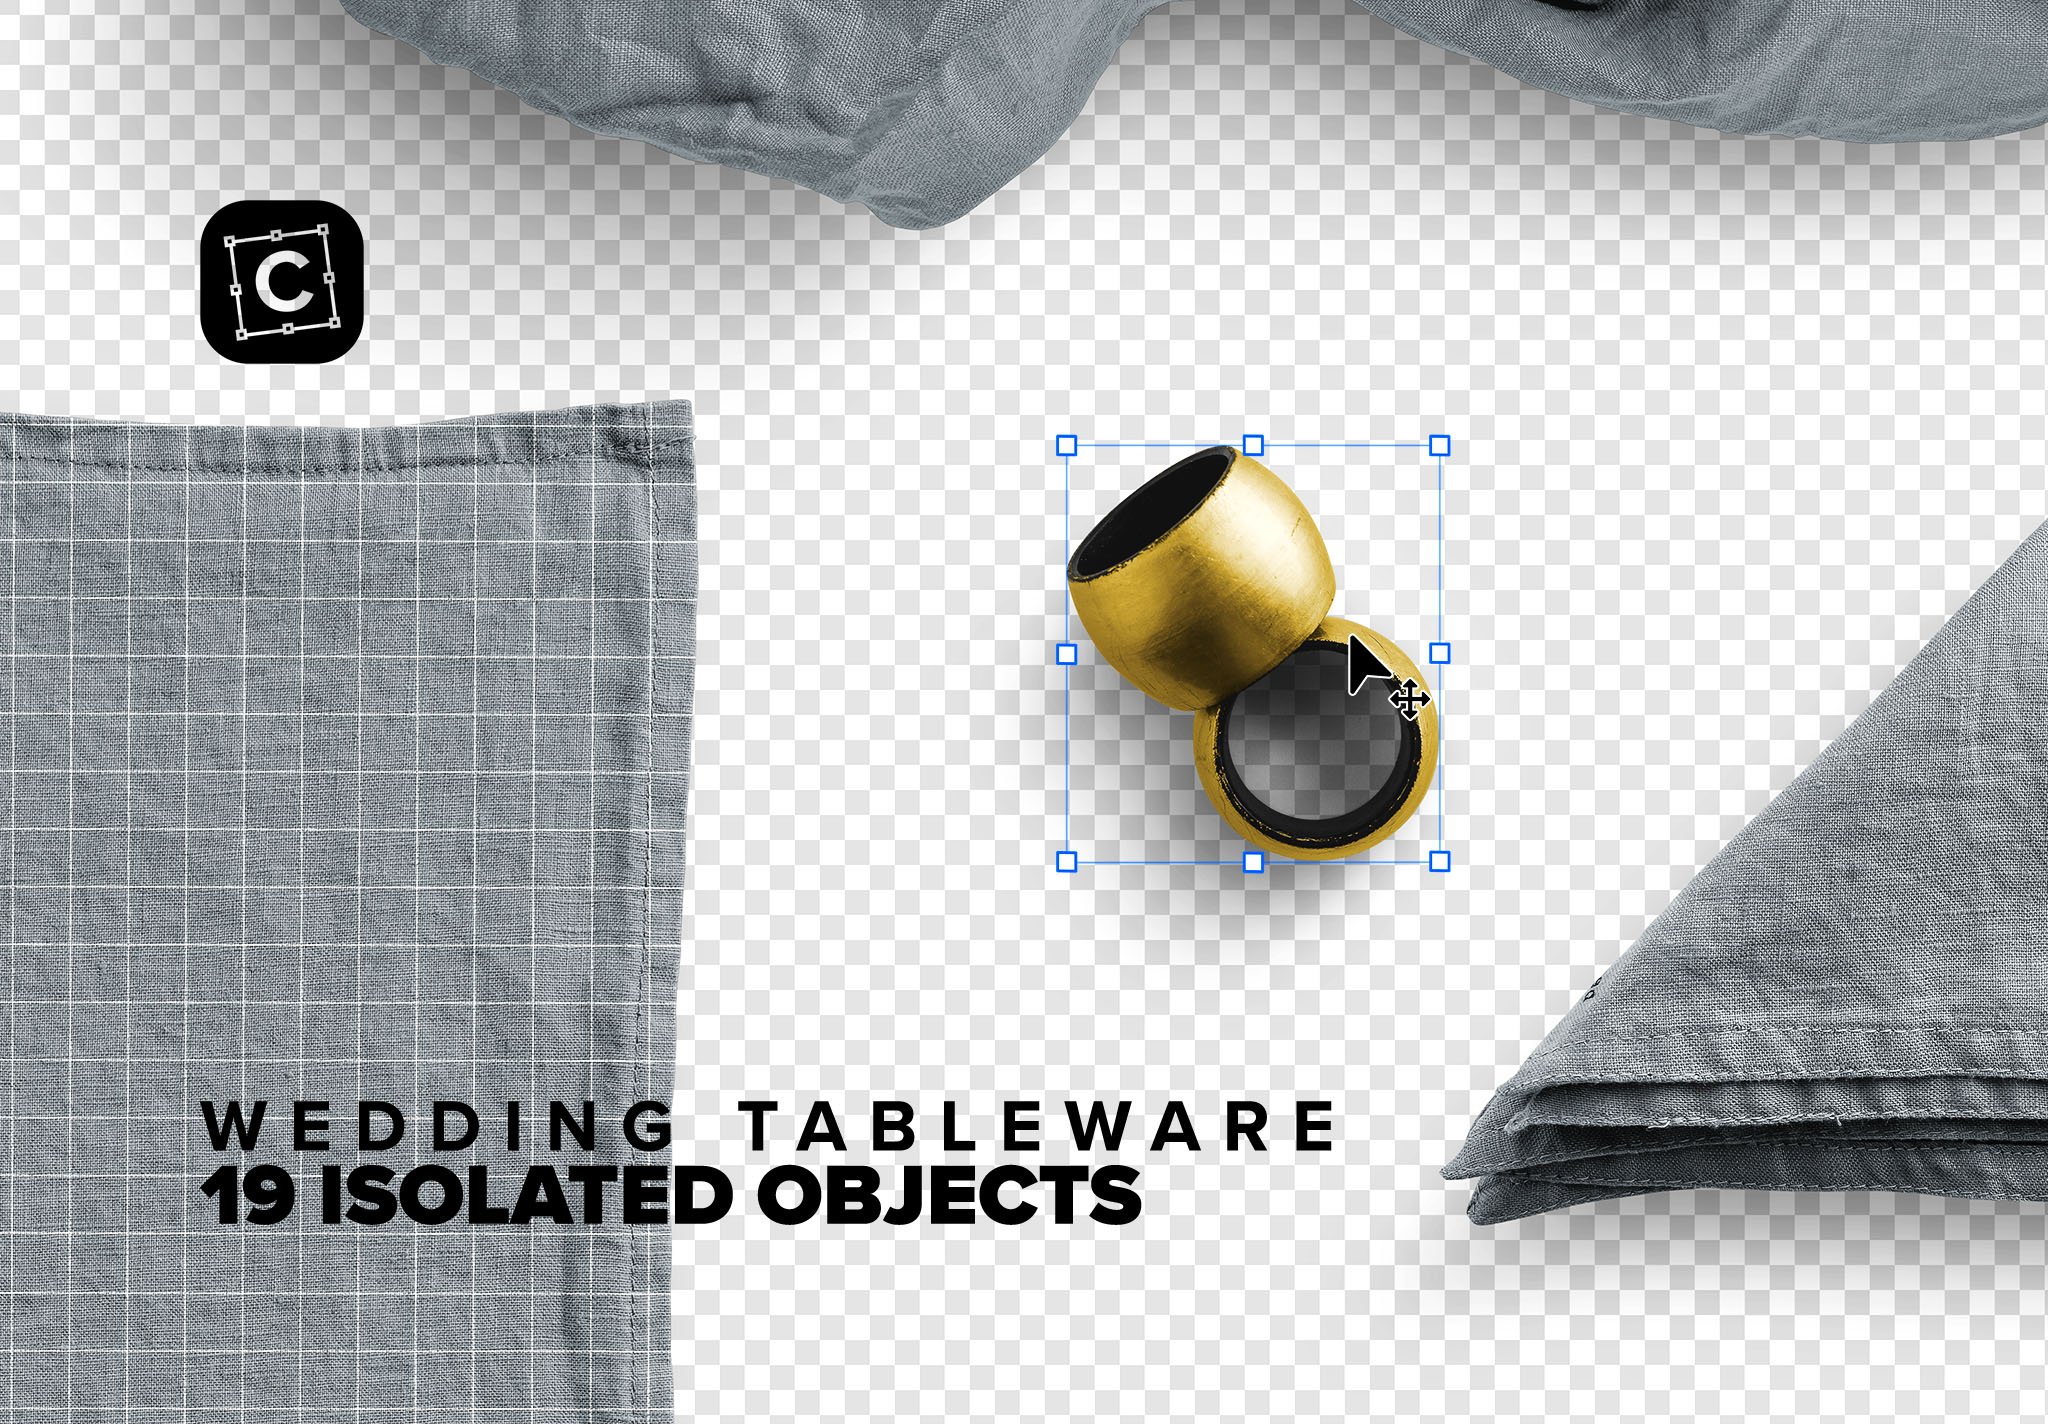 wedding tableware 03 isolated objects 7